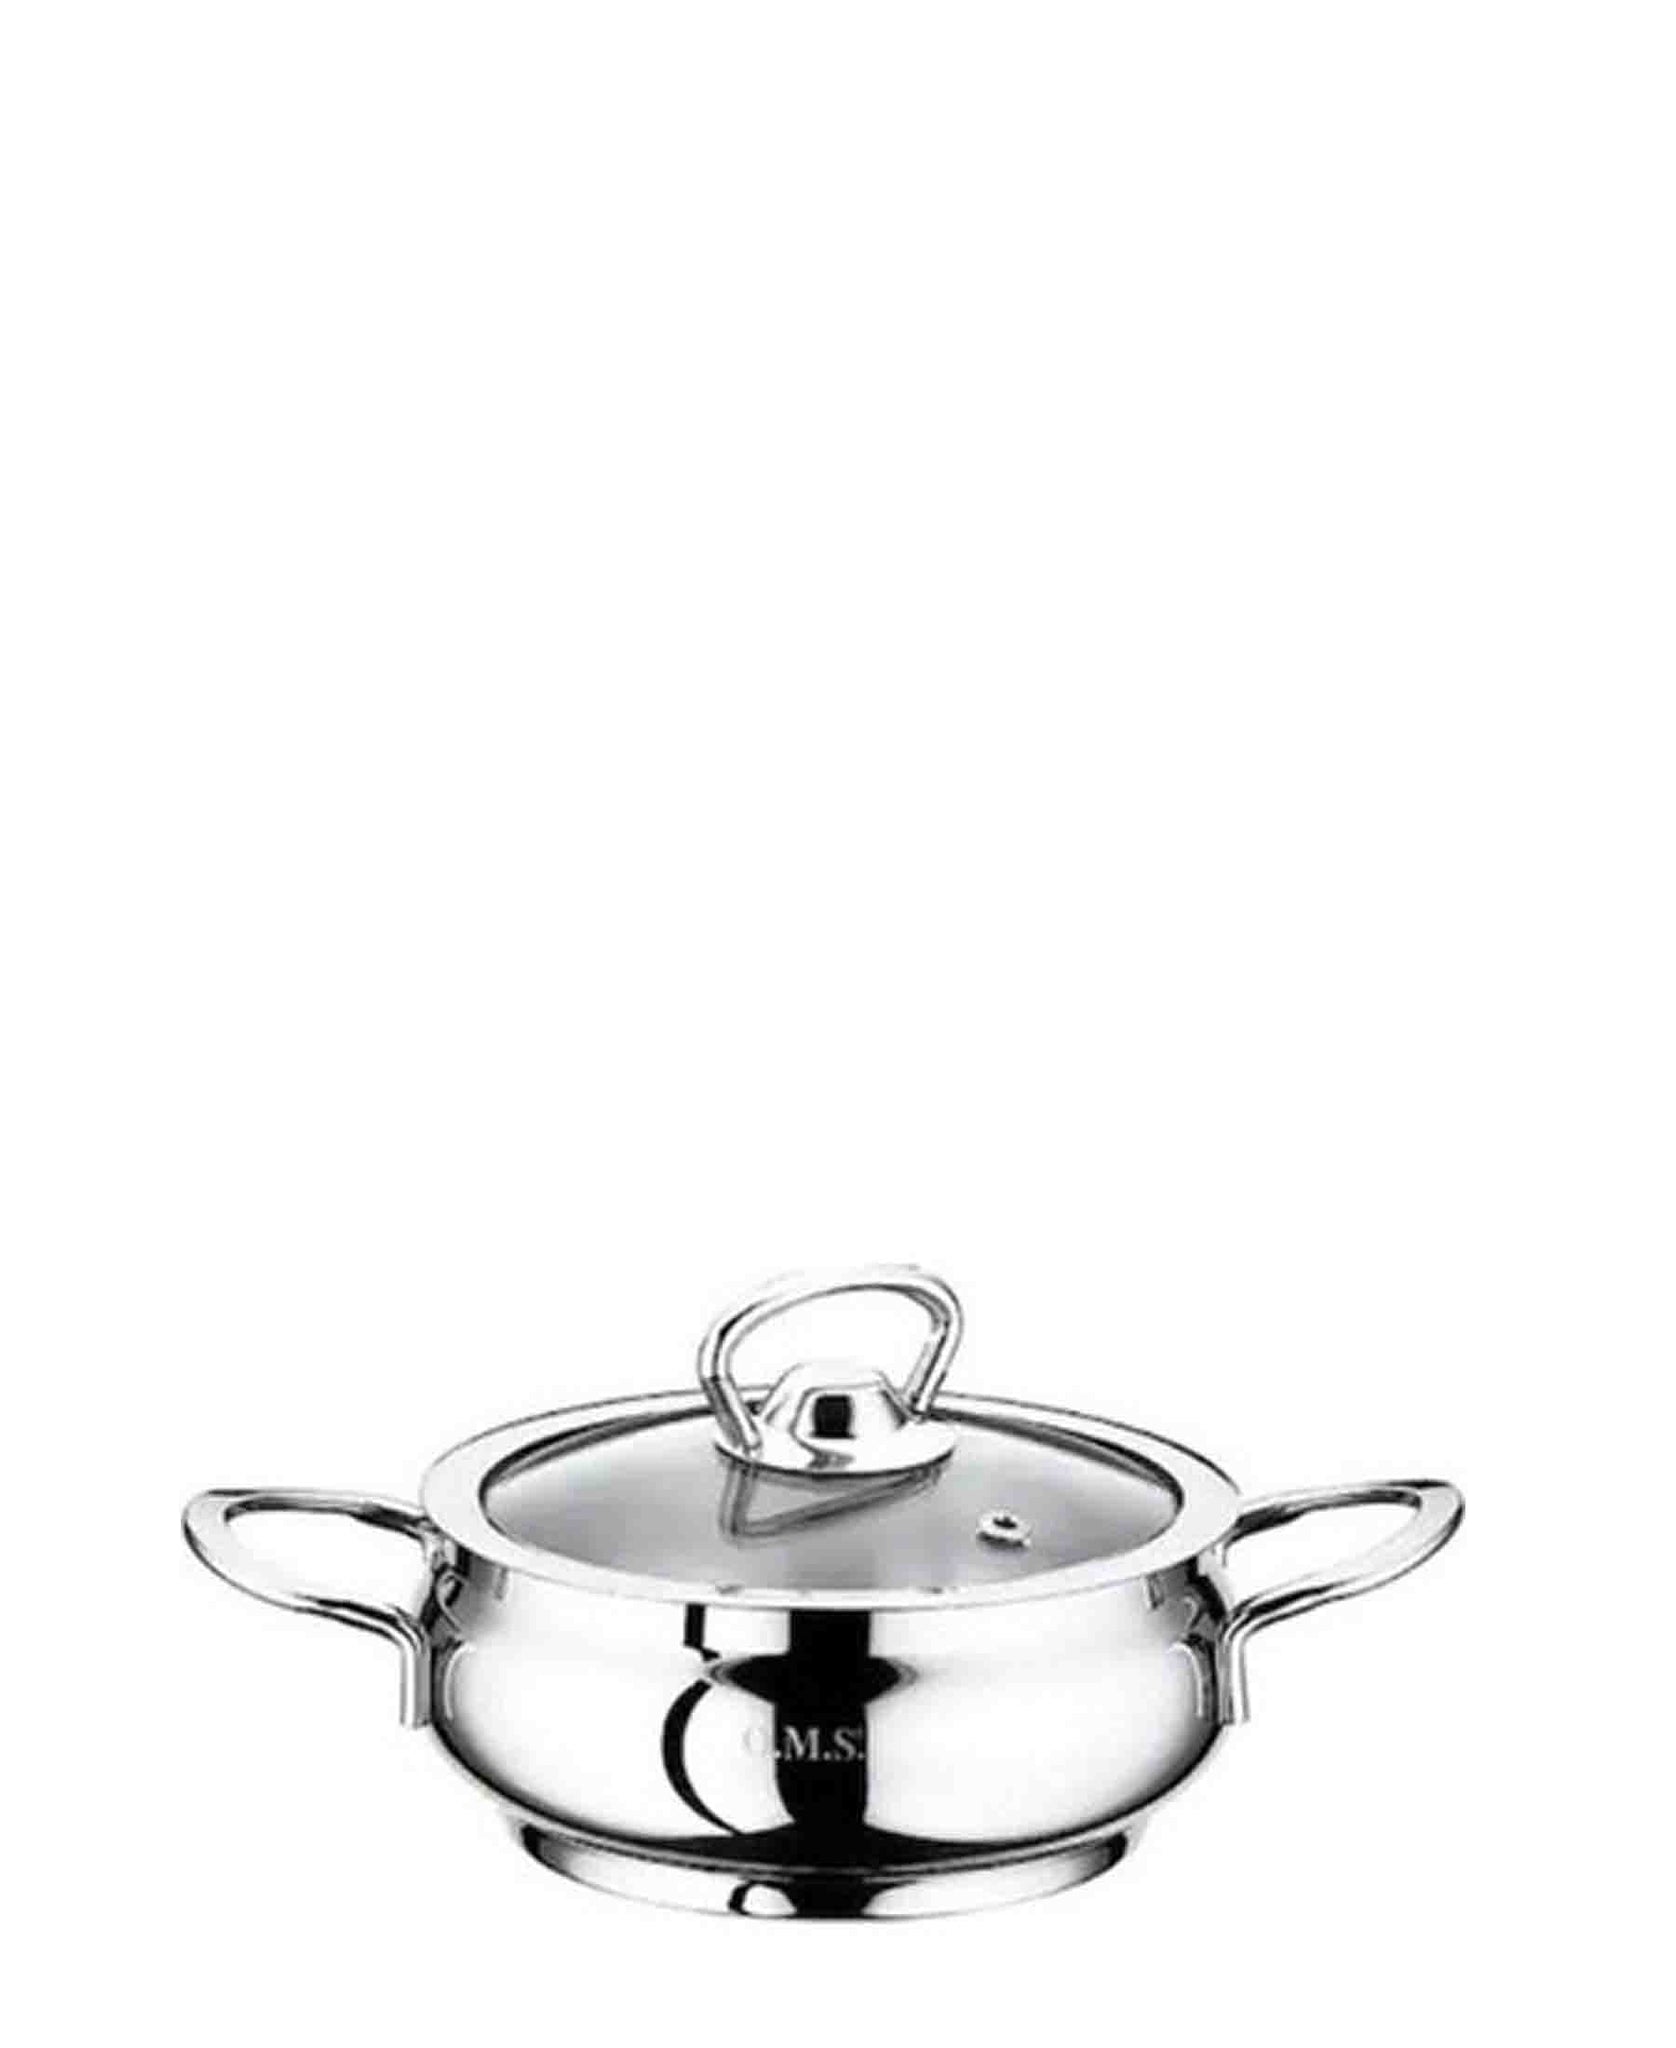 OMS Mini 16 x 6cm Stainless Steel Belly Shaped Casserole - Silver